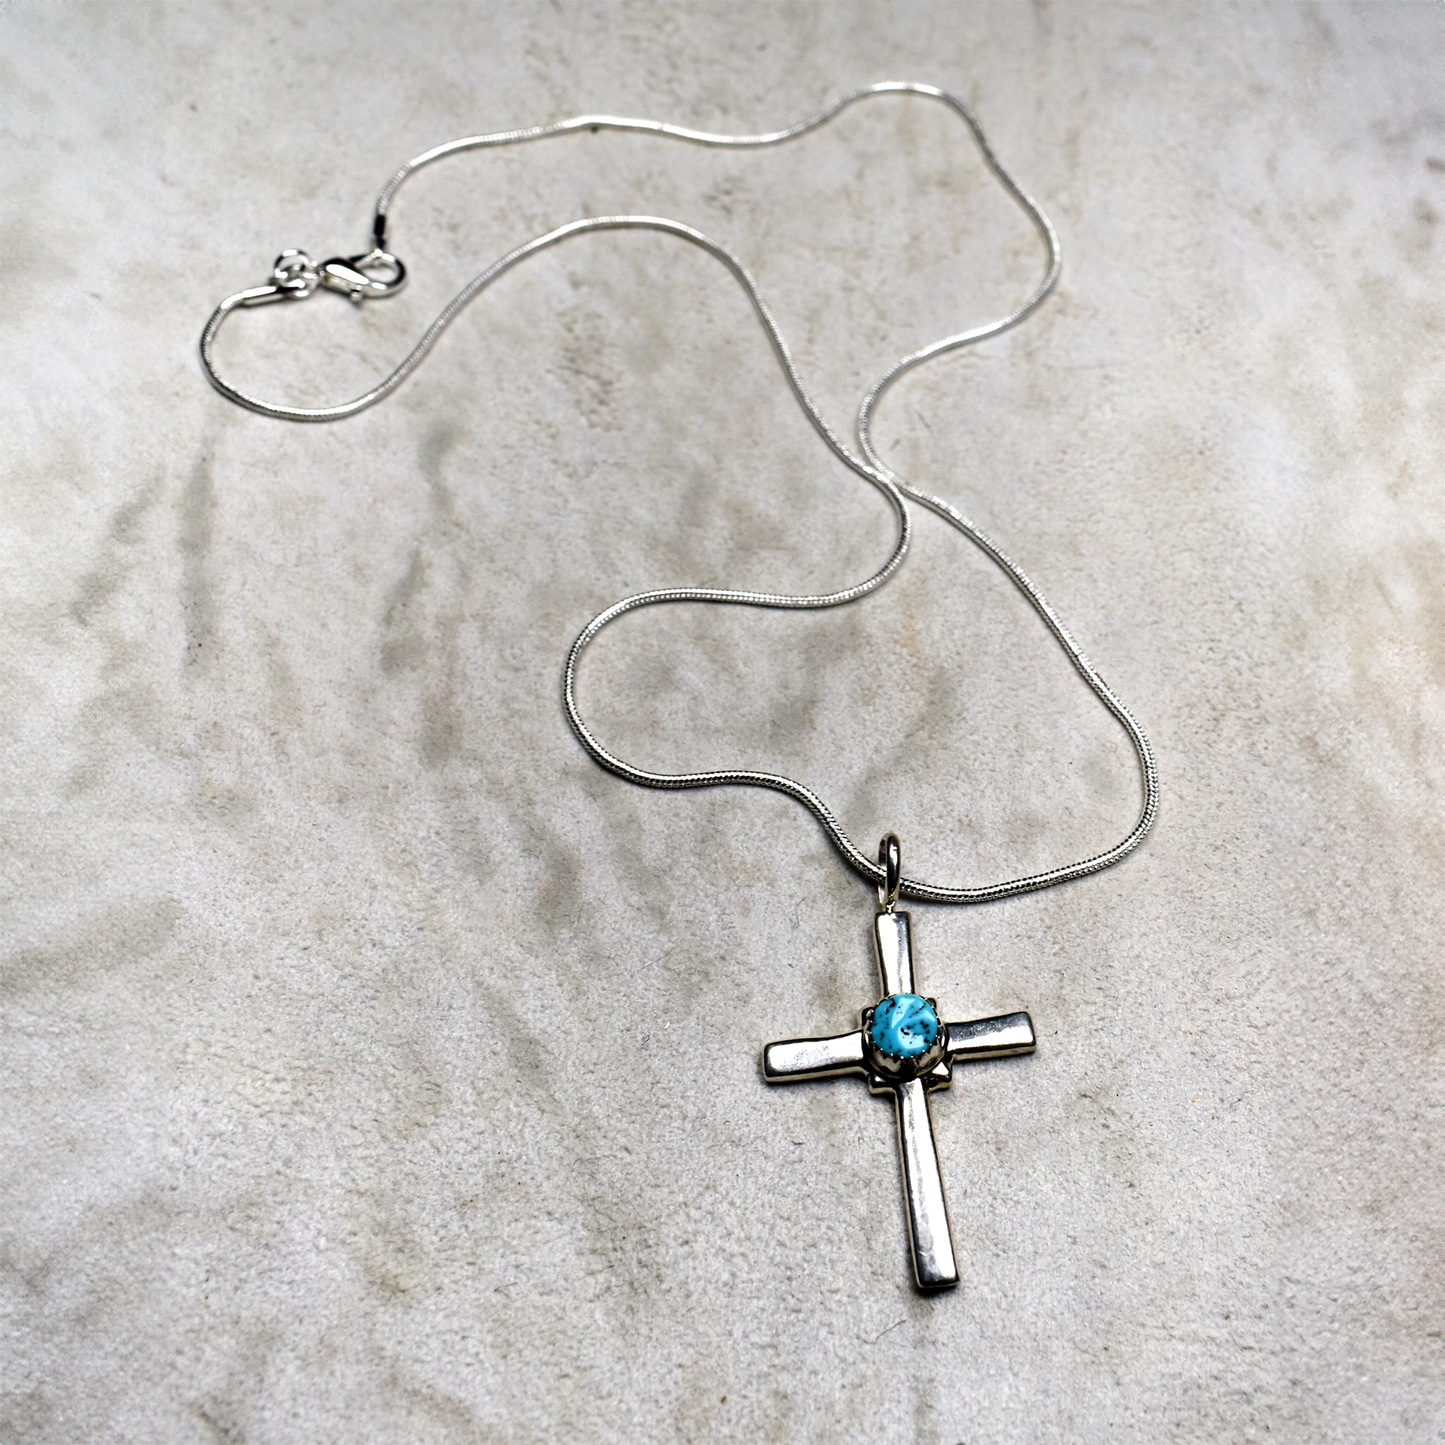 Sand Cast Latin Style Cross Necklace with Sleeping Beauty Turquoise Stone